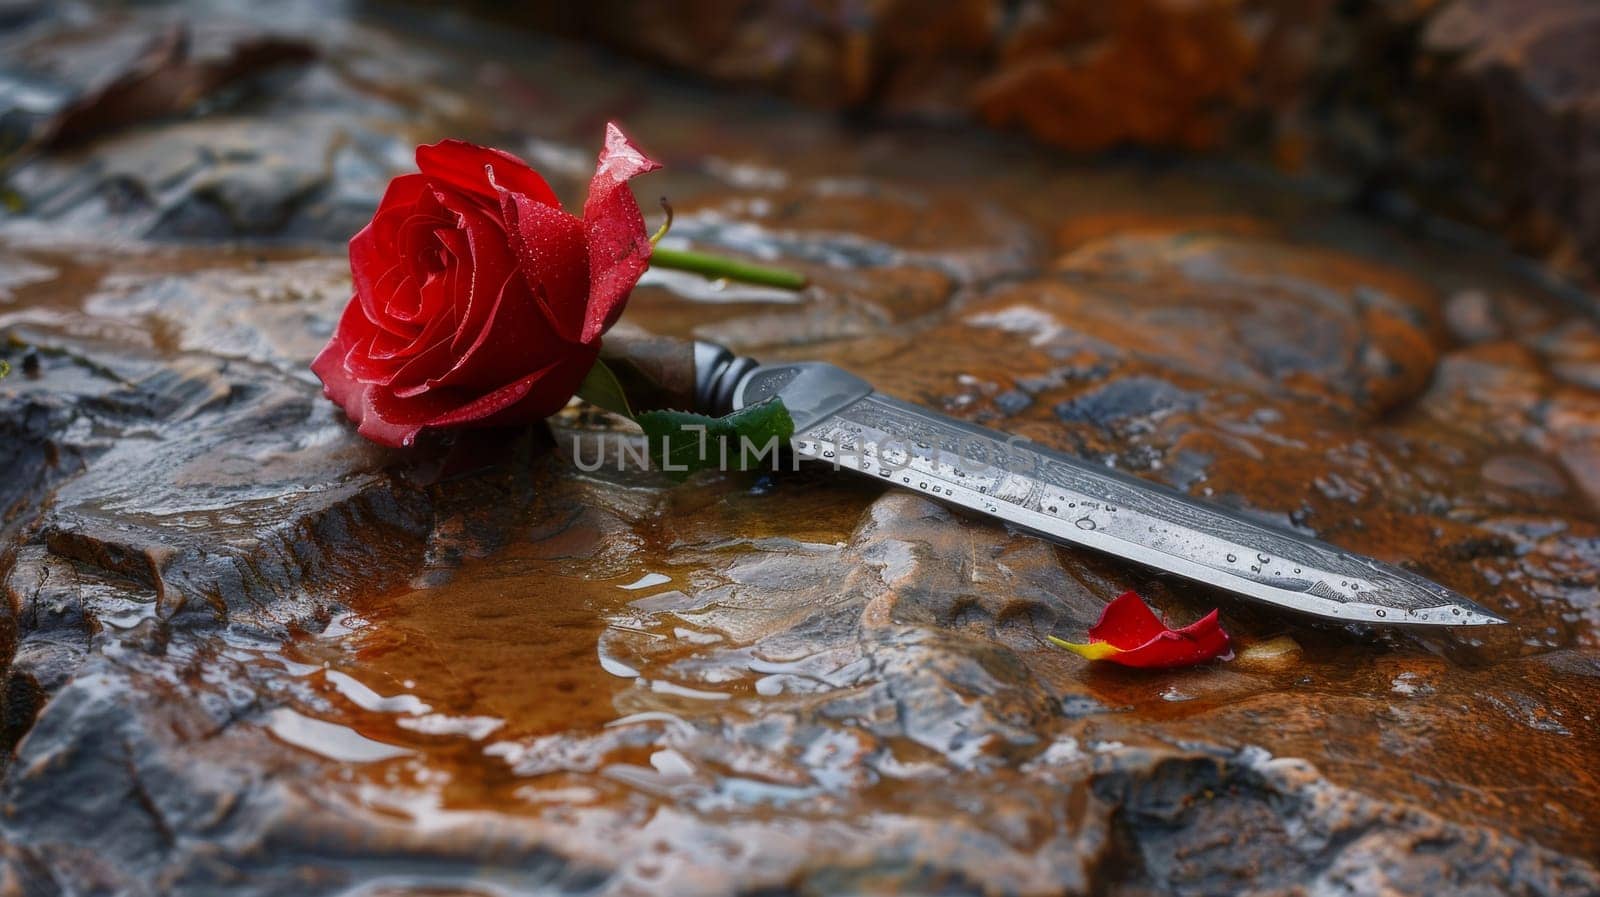 A knife and a rose on the ground in water